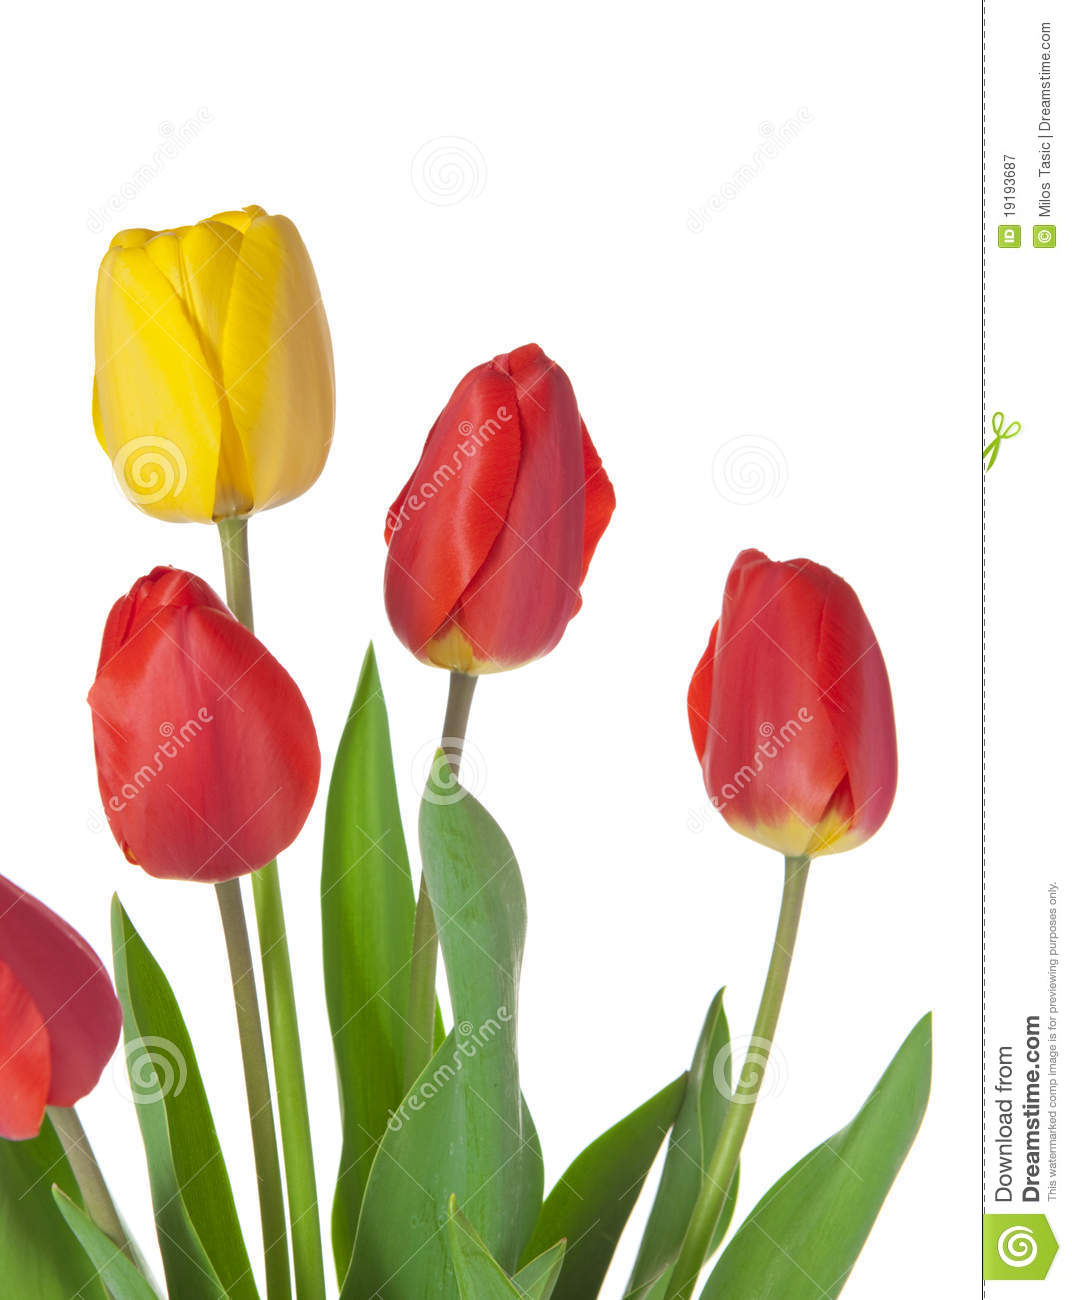 Tulip Bouquet Royalty Free Stock Photography   Image  19193687